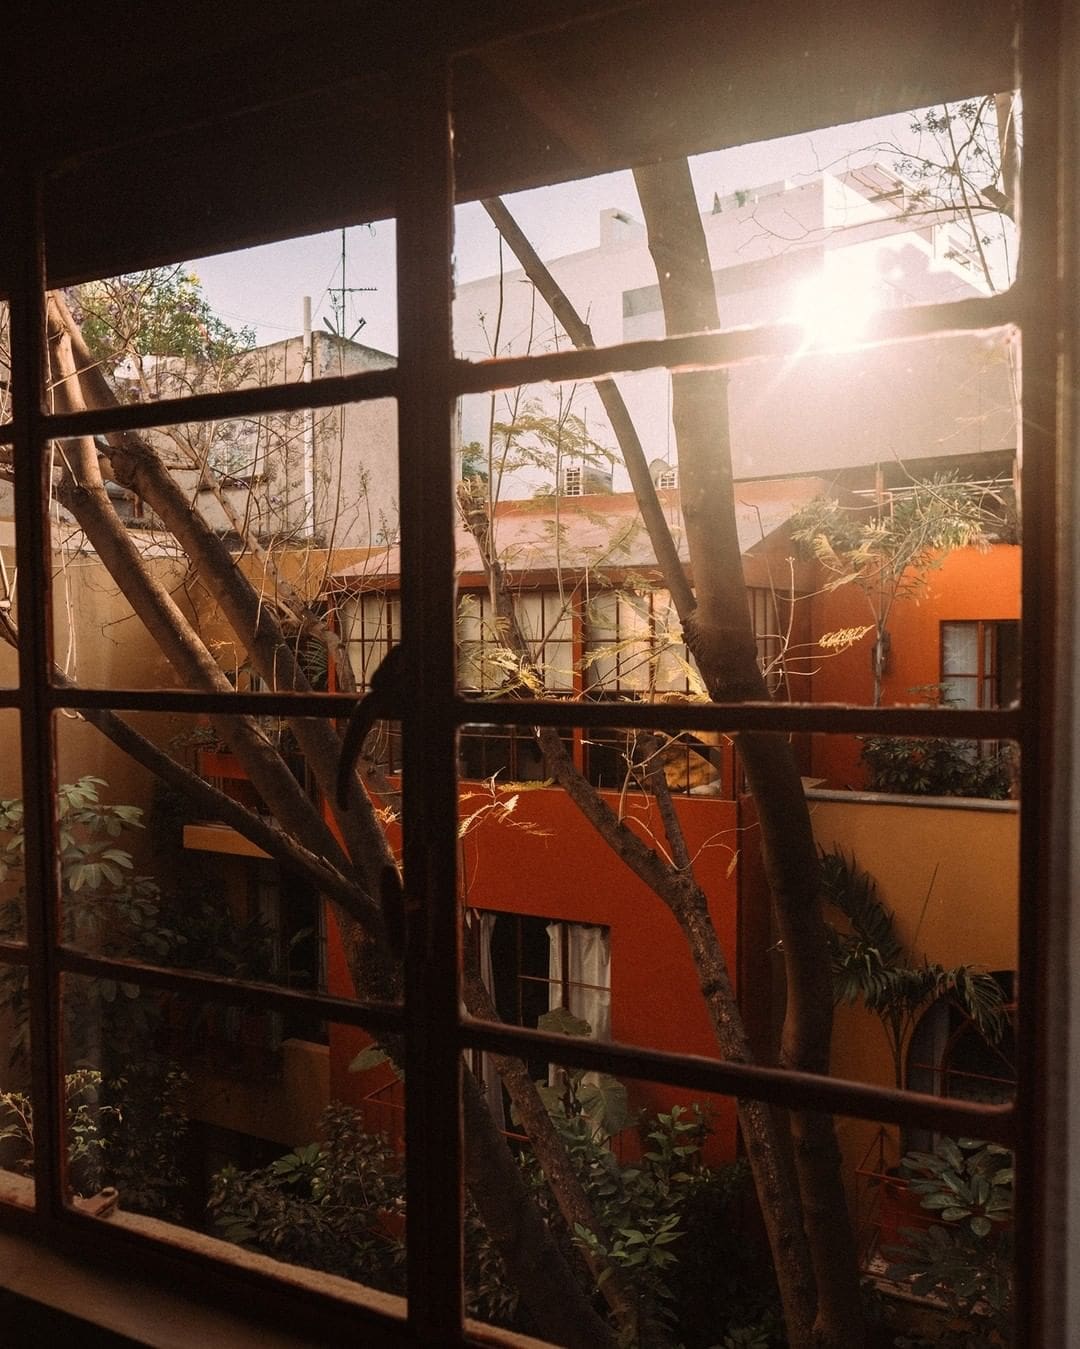 Sunlight beams through the window overlooking the leafy courtyard at The Red Tree House